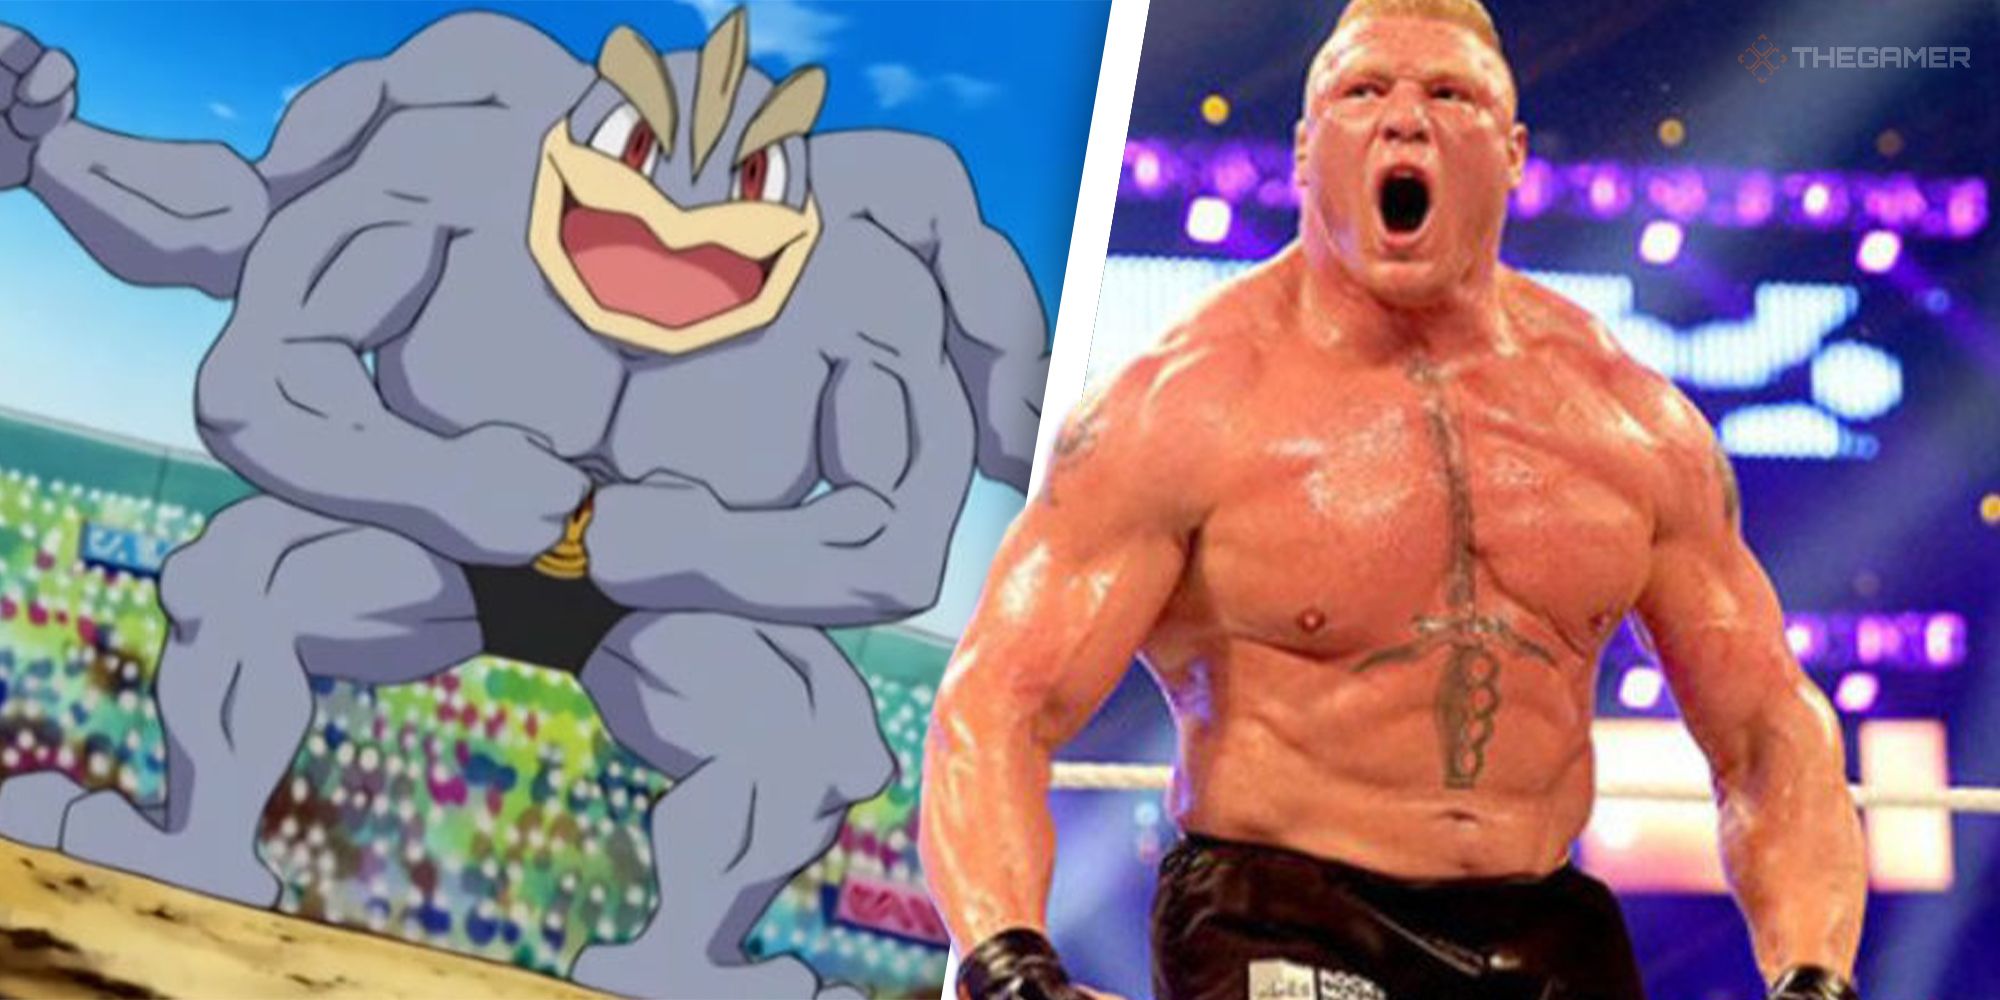 Heres 30 Wrestlers As Pokemon For The Royal Rumble (16)